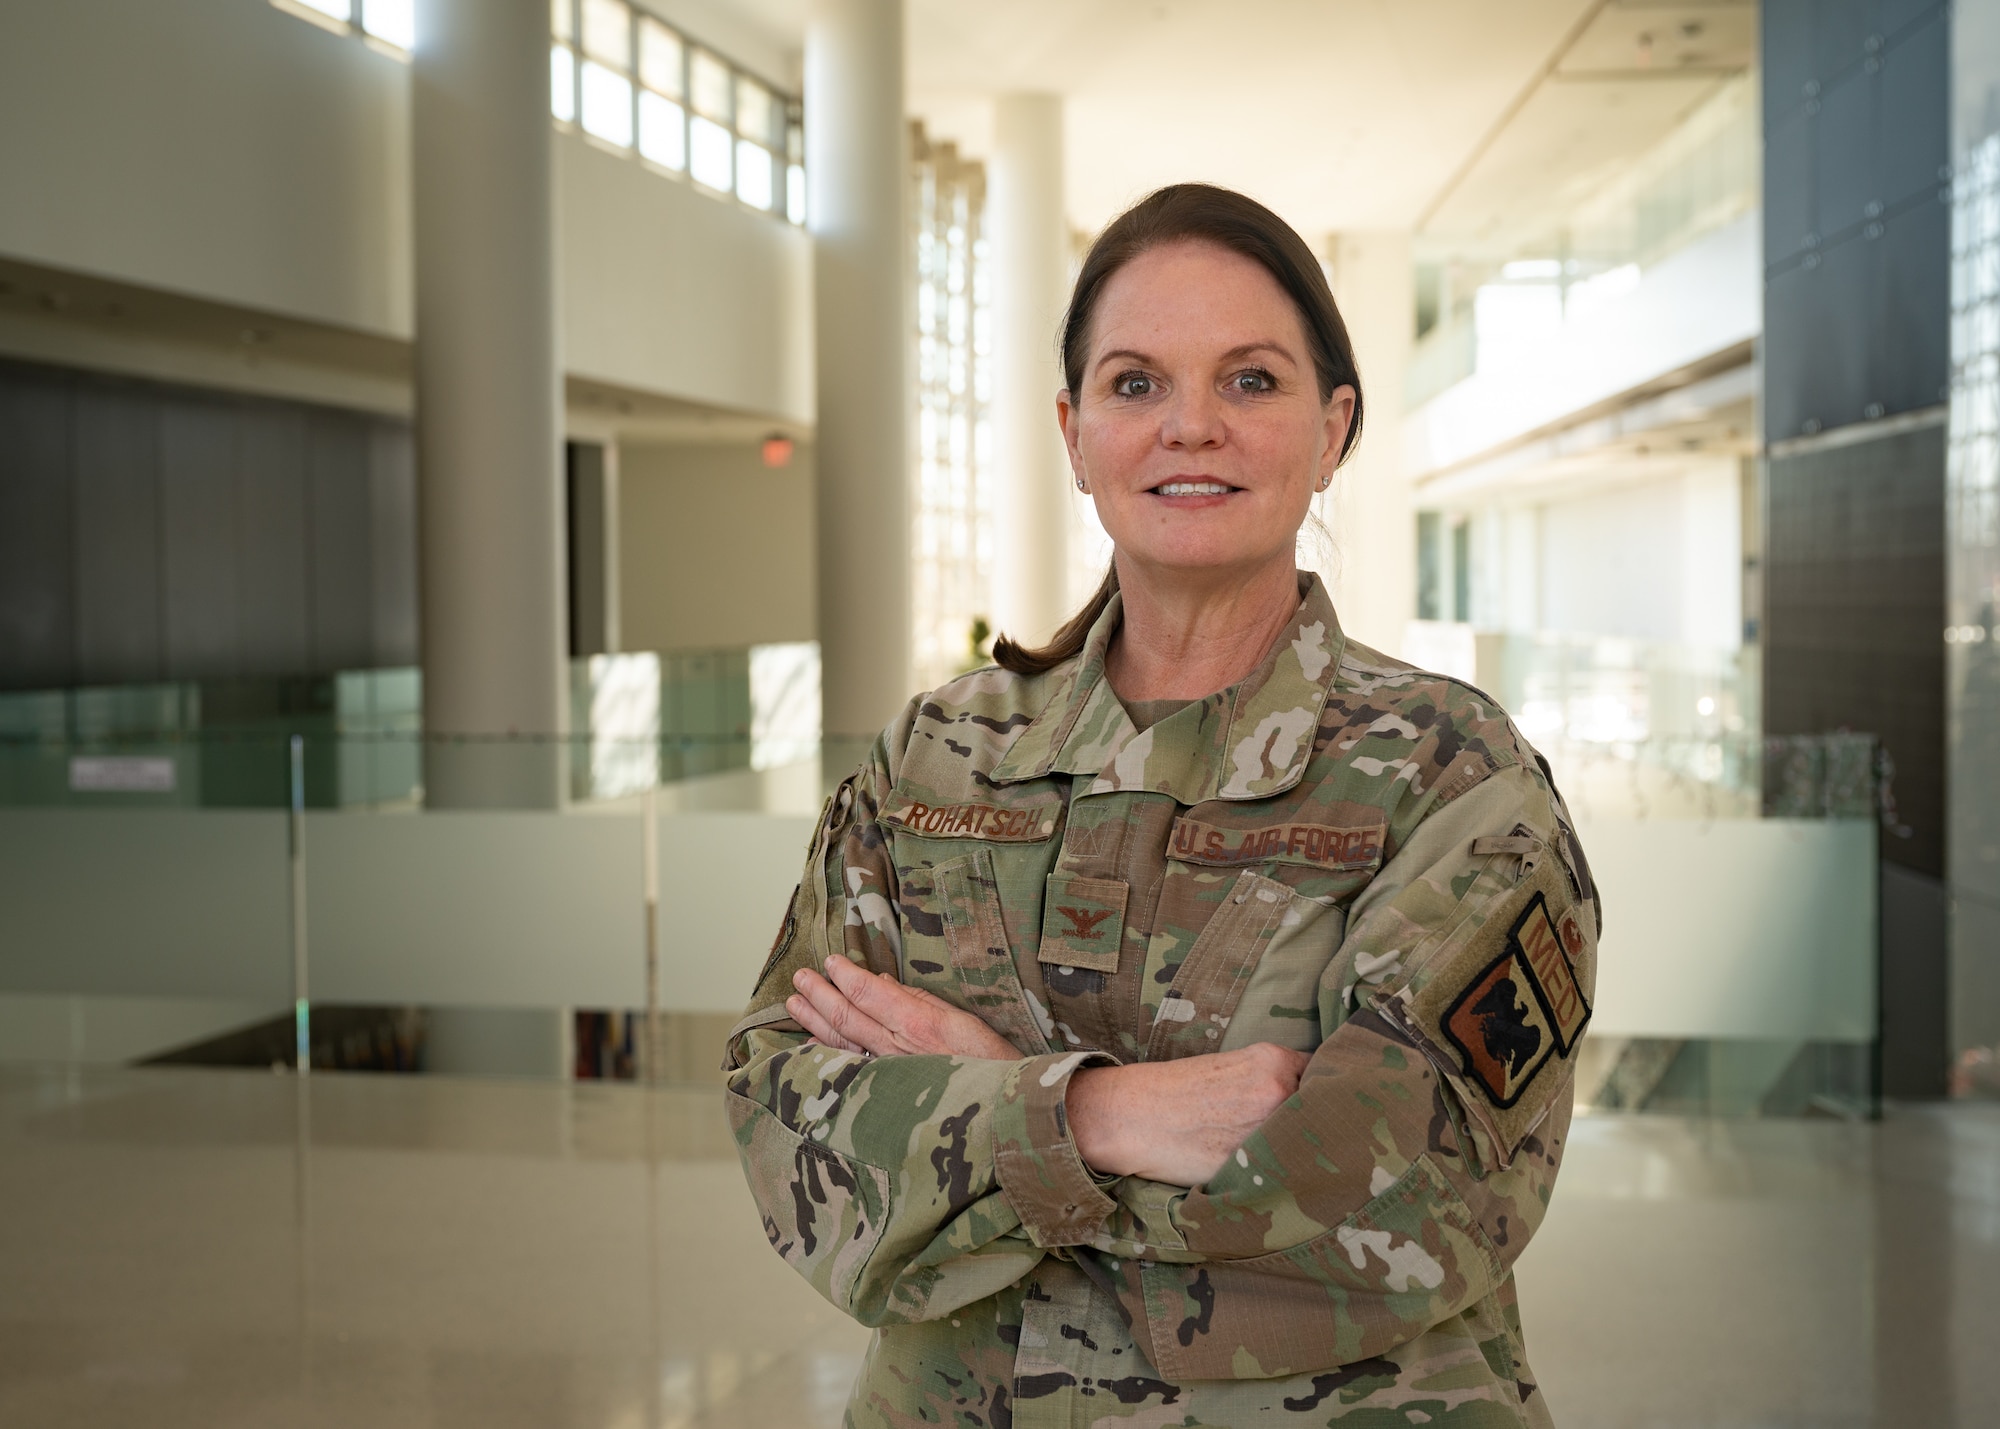 U.S. Air Force Col. Linda A. Rohatsch, director, Air National Guard (ANG) Office of the Air Surgeon, poses for a portrait at the ANG Readiness Center, Joint Base Andrews, Maryland, Dec. 1, 2022. Rohatasch is the first clinical nurse to assume command of the ANG Office of the Air Surgeon and brings nearly four decades of medical experience to the position. (U.S. Air National Guard photo by Staff Sgt. Sarah M. McClanahan)